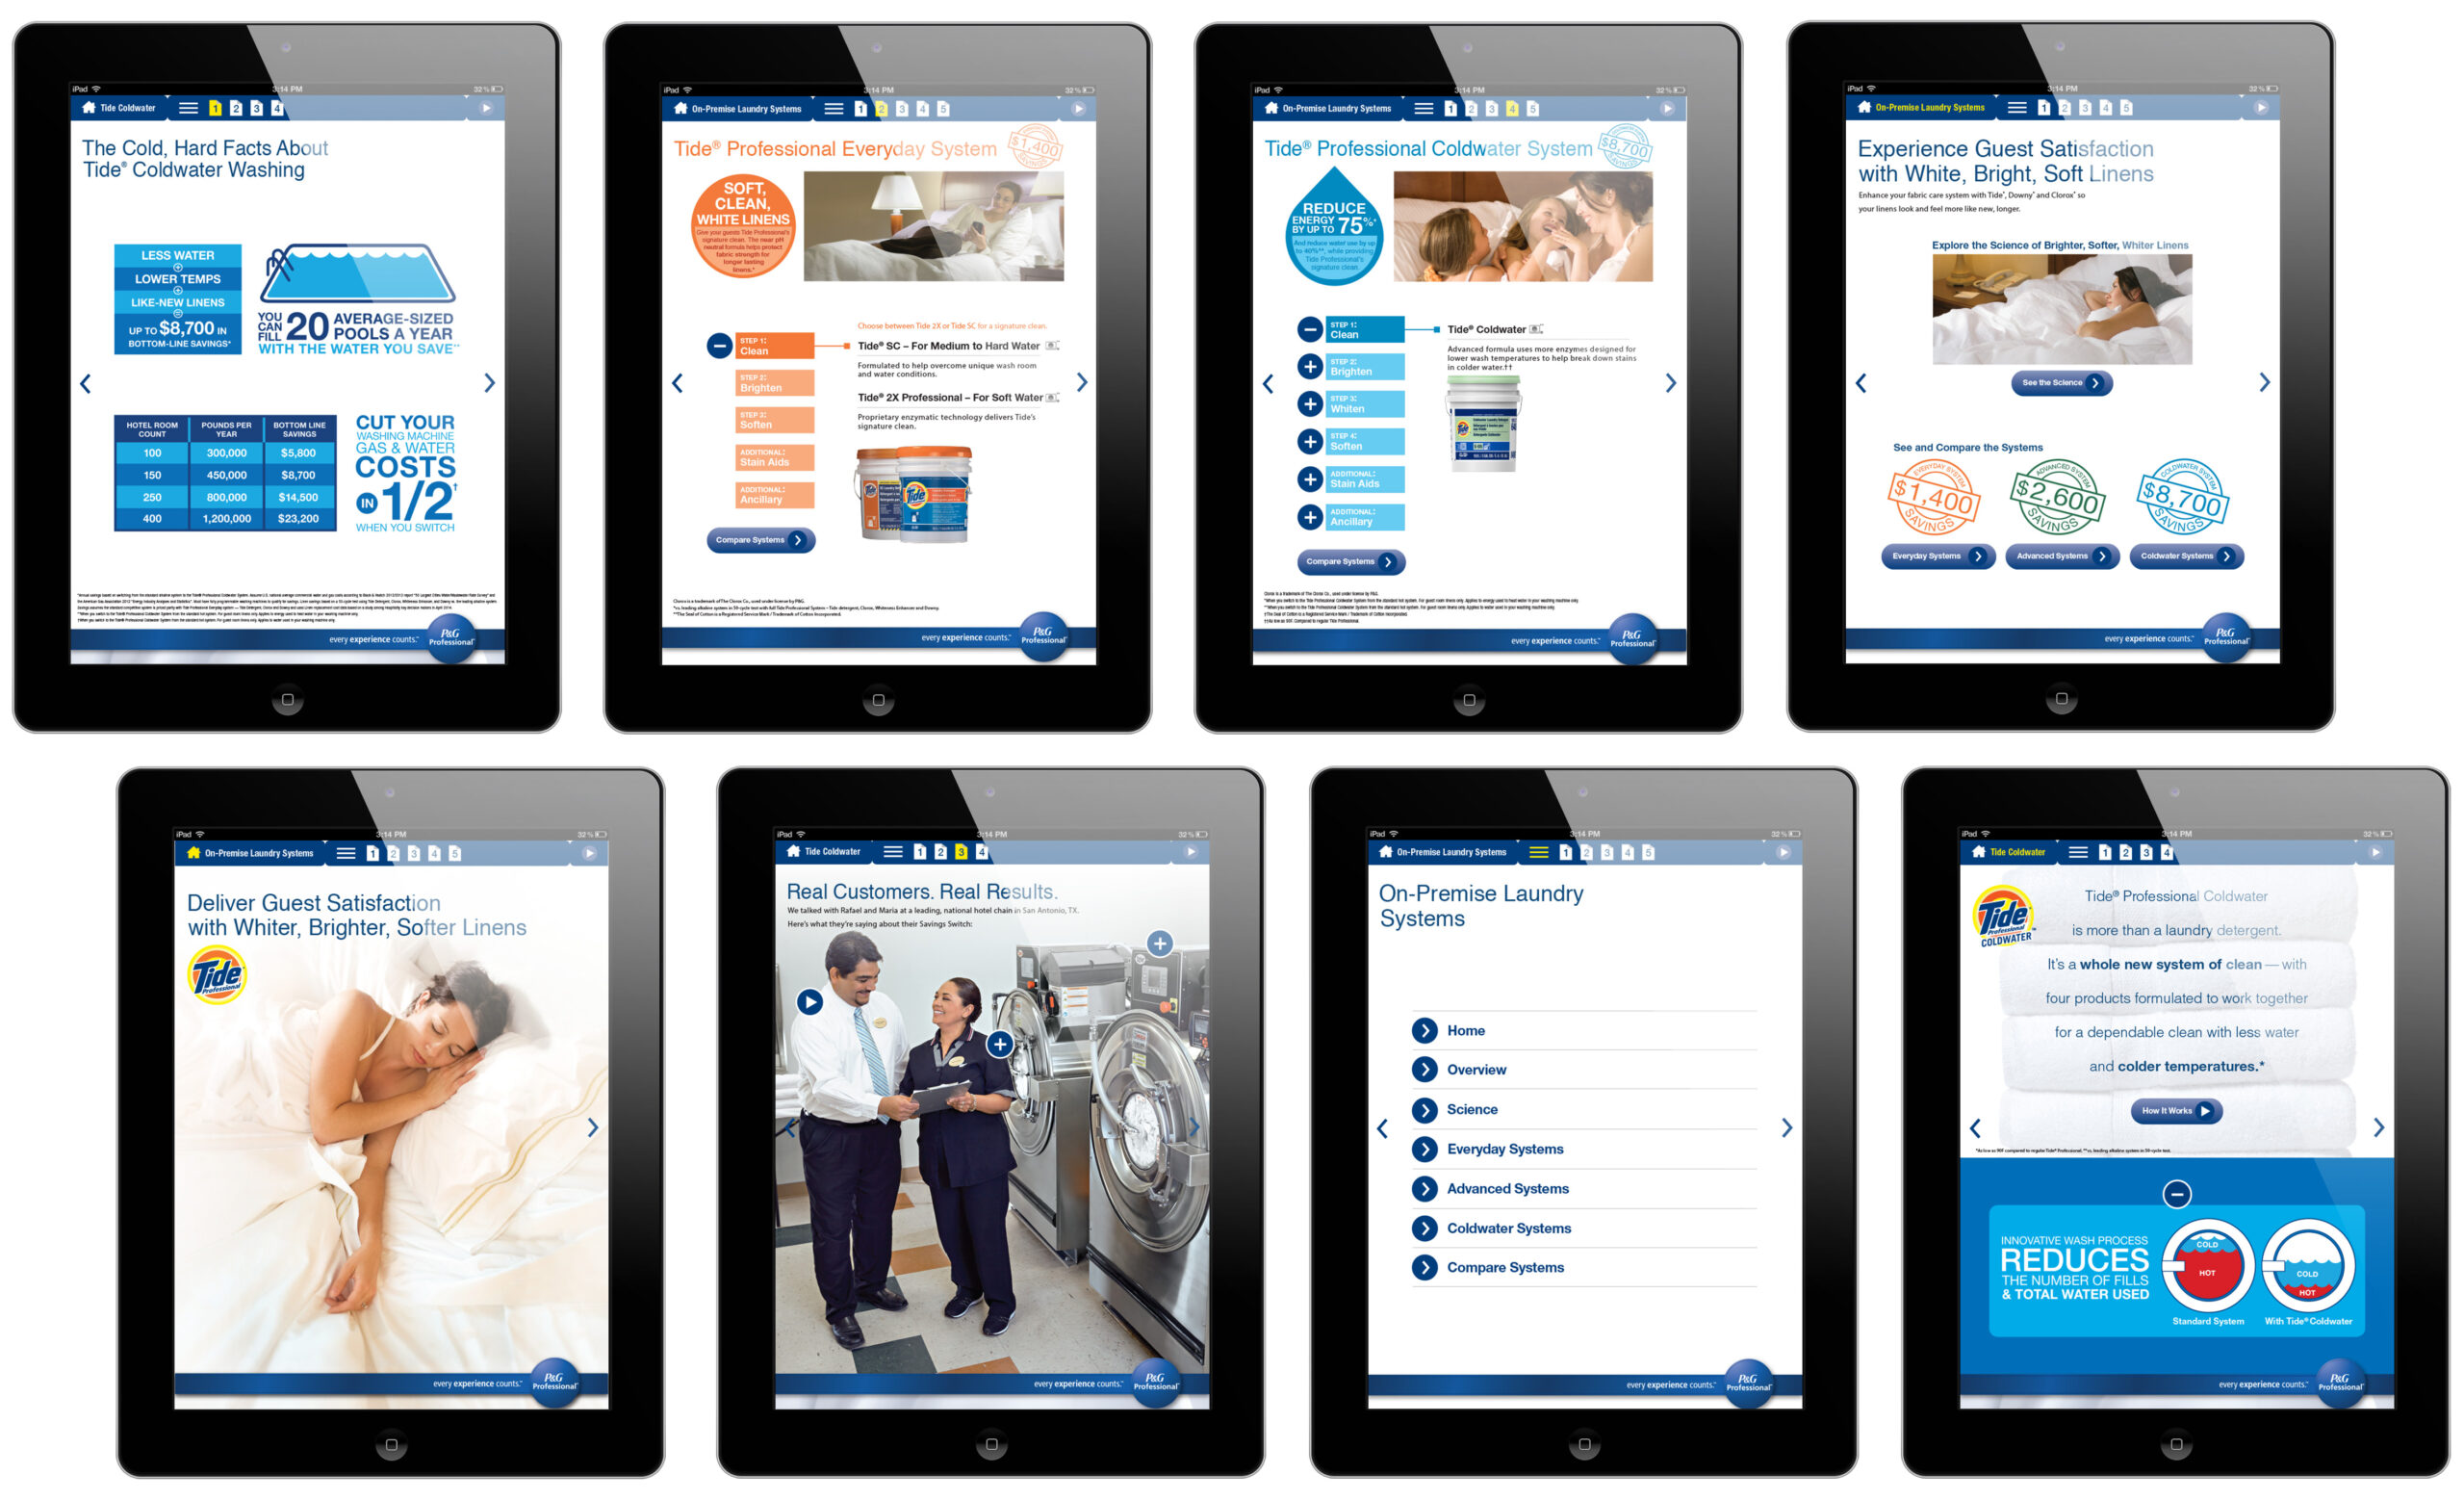 Procter and Gamble interactive ePubs